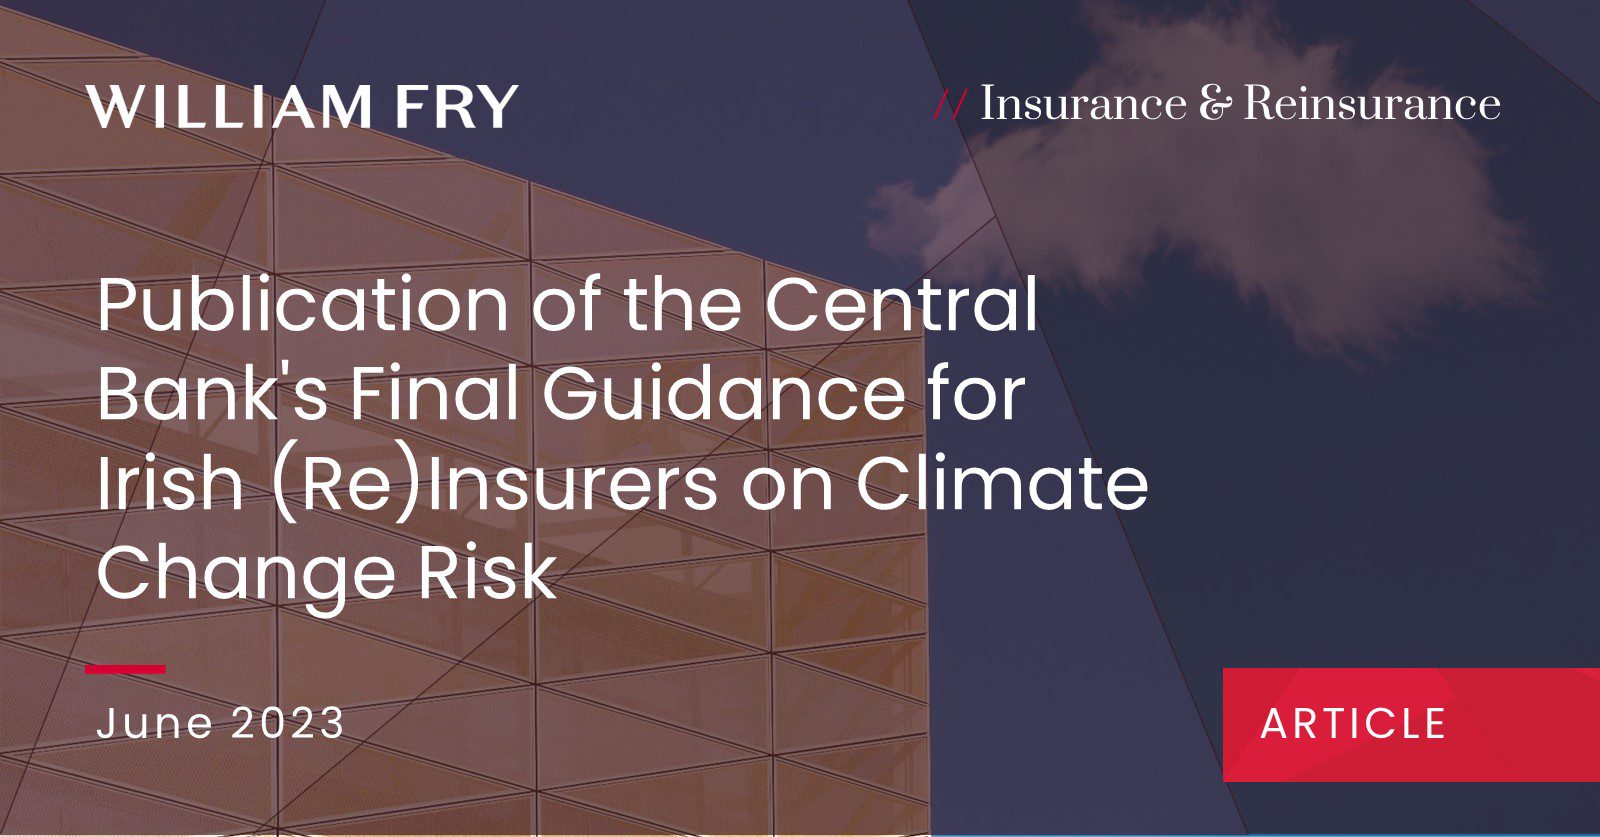 Publication of the Central Bank's Final Guidance for Irish (Re)Insurers on Climate Change Risk